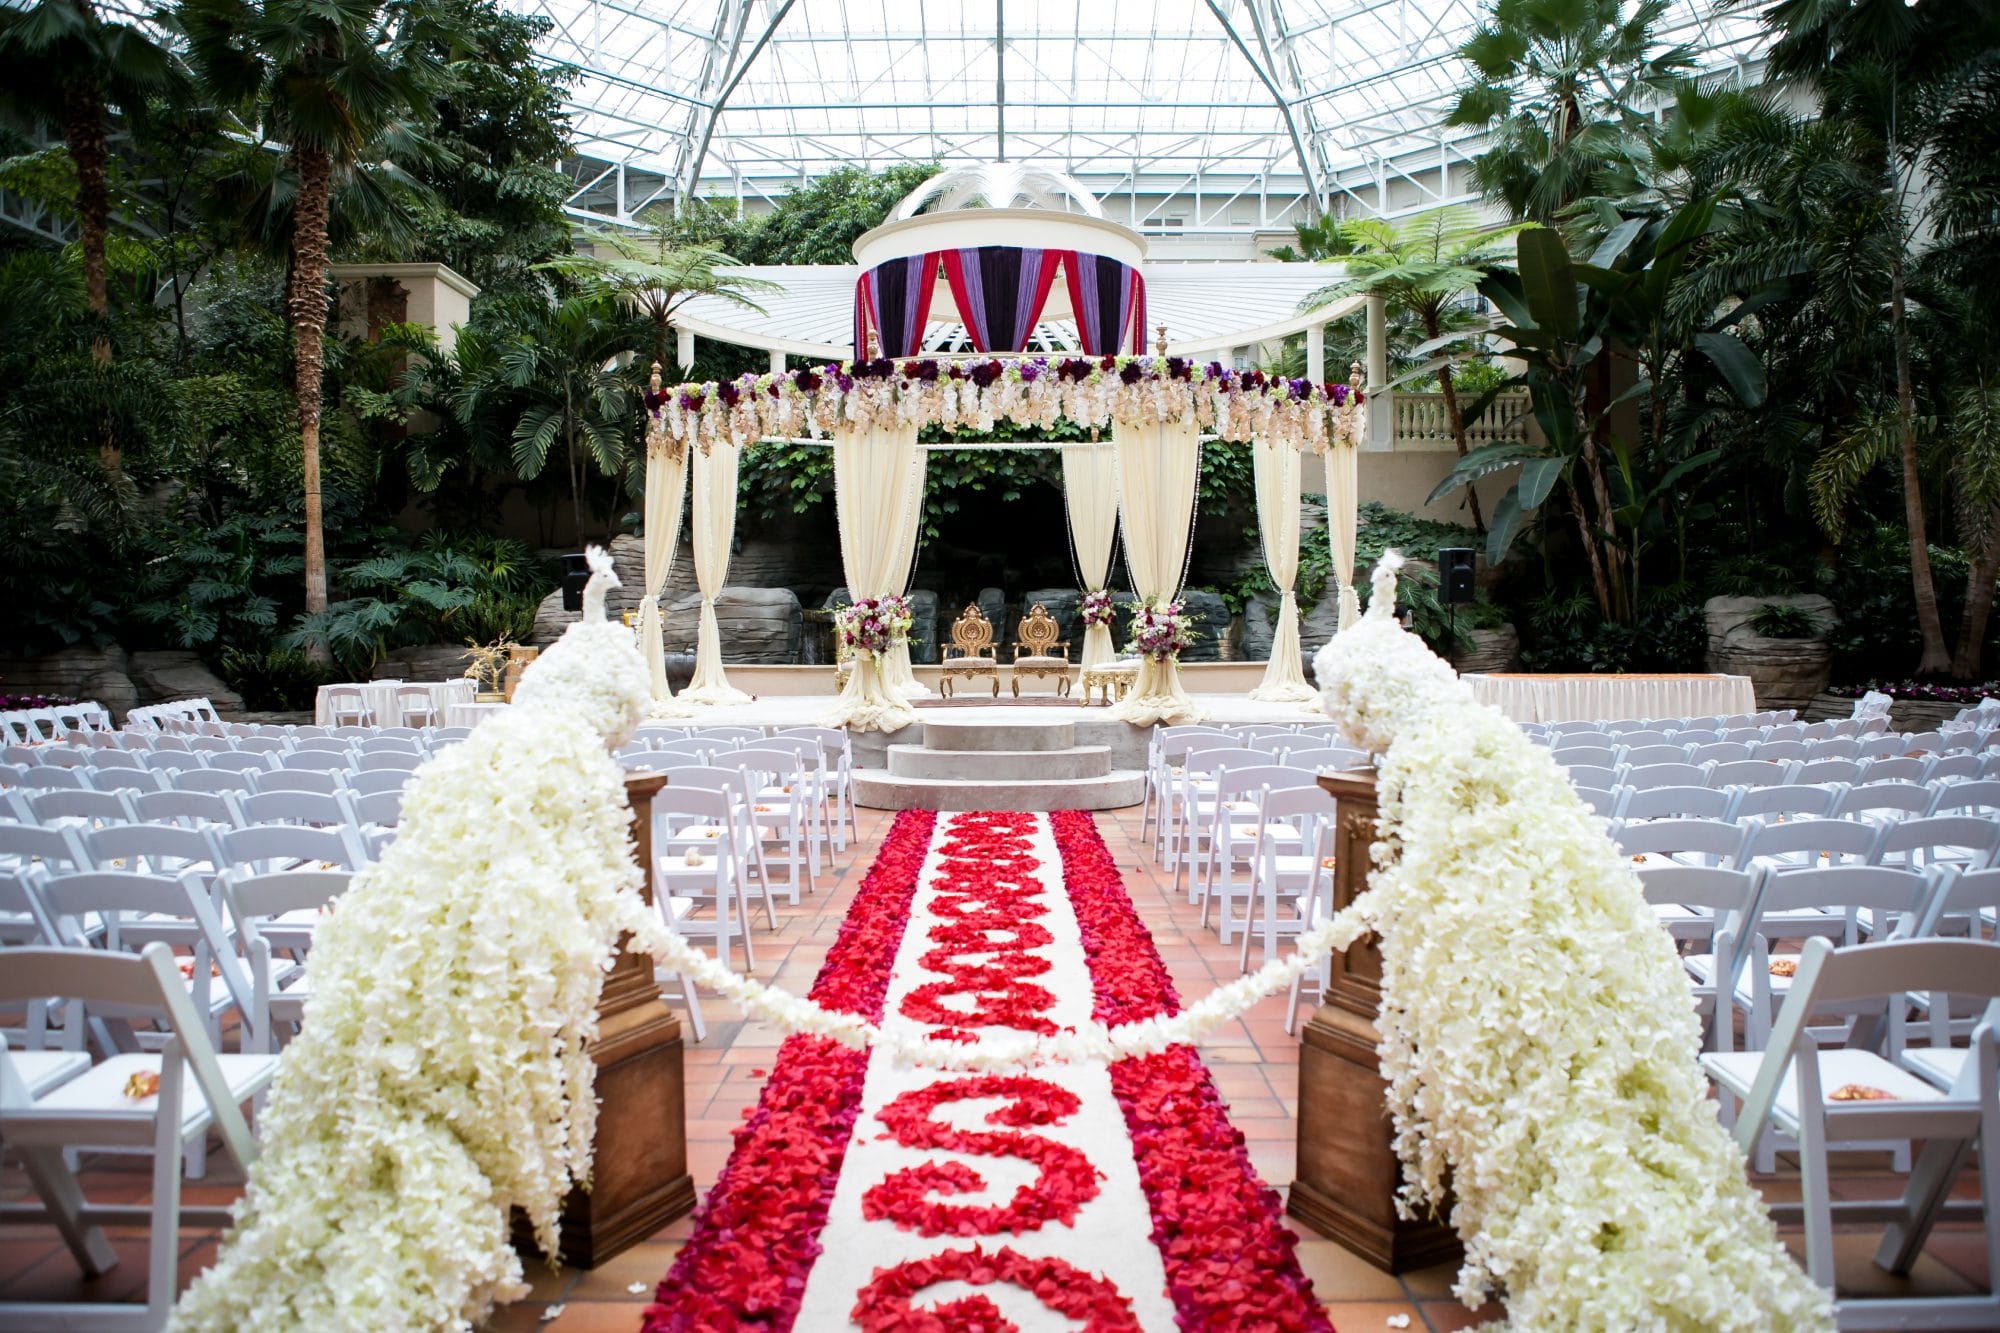 stunning south asian wedding ceremony festooned with flowers